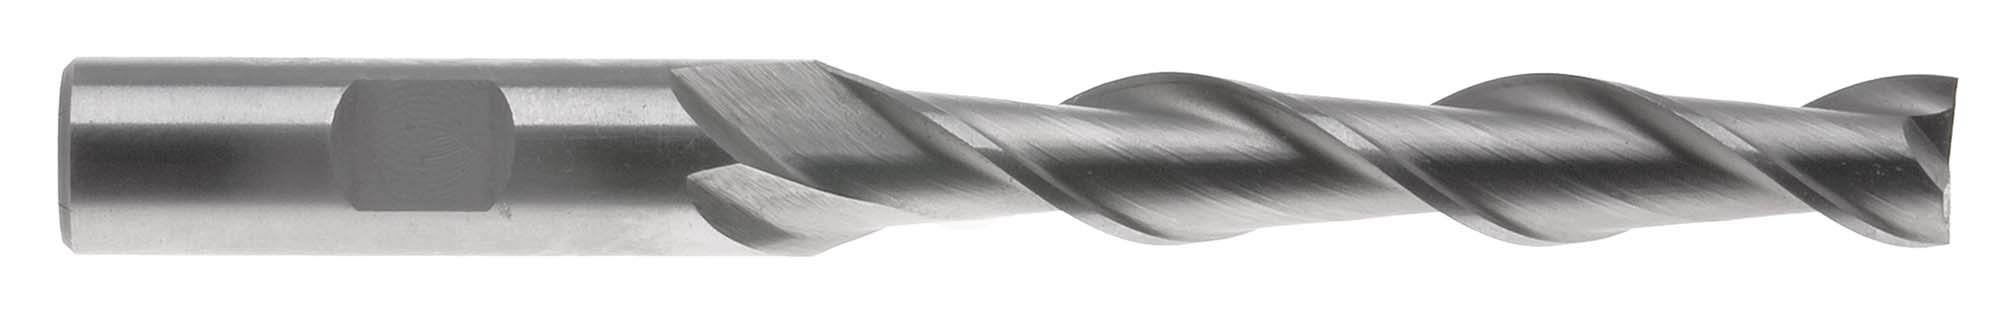 EM-AL20B  5/8"  Extra Long Aluminum Cutting 2 Flute End Mill with High Helix Flutes, 5/8" shank, High Speed Steel